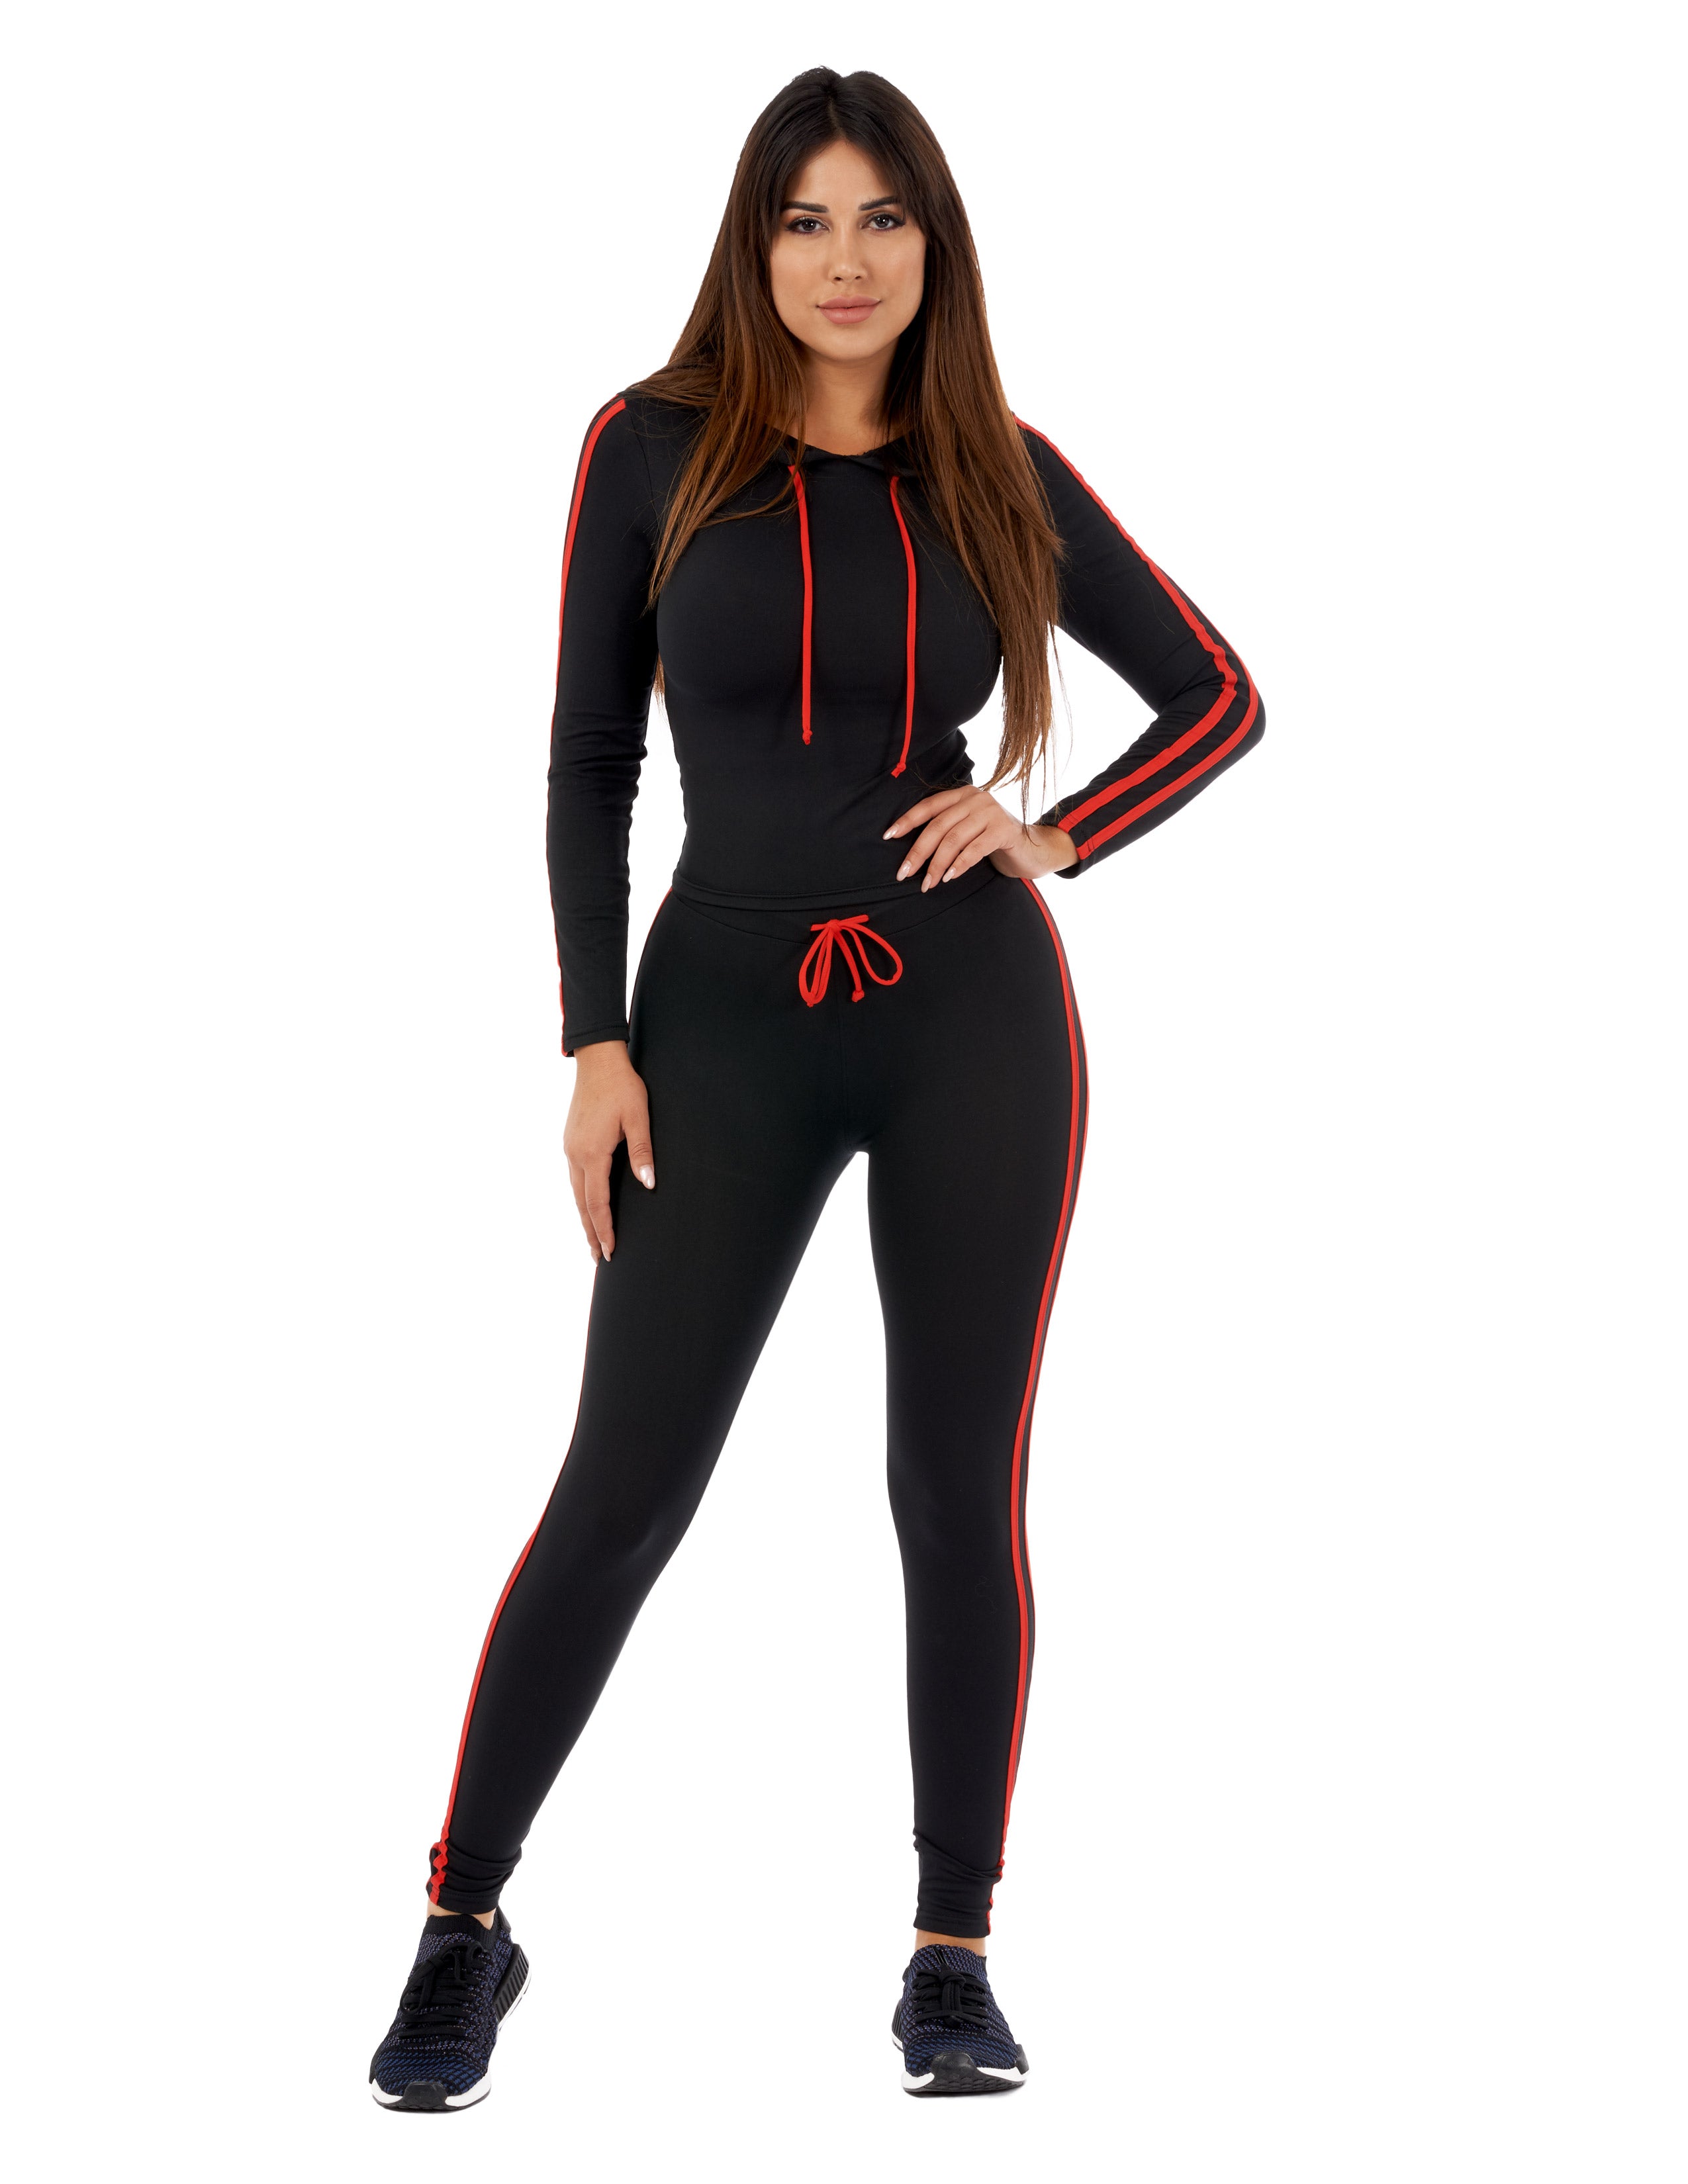 Let's Get Physical Two Piece Hoodie And Pants Set